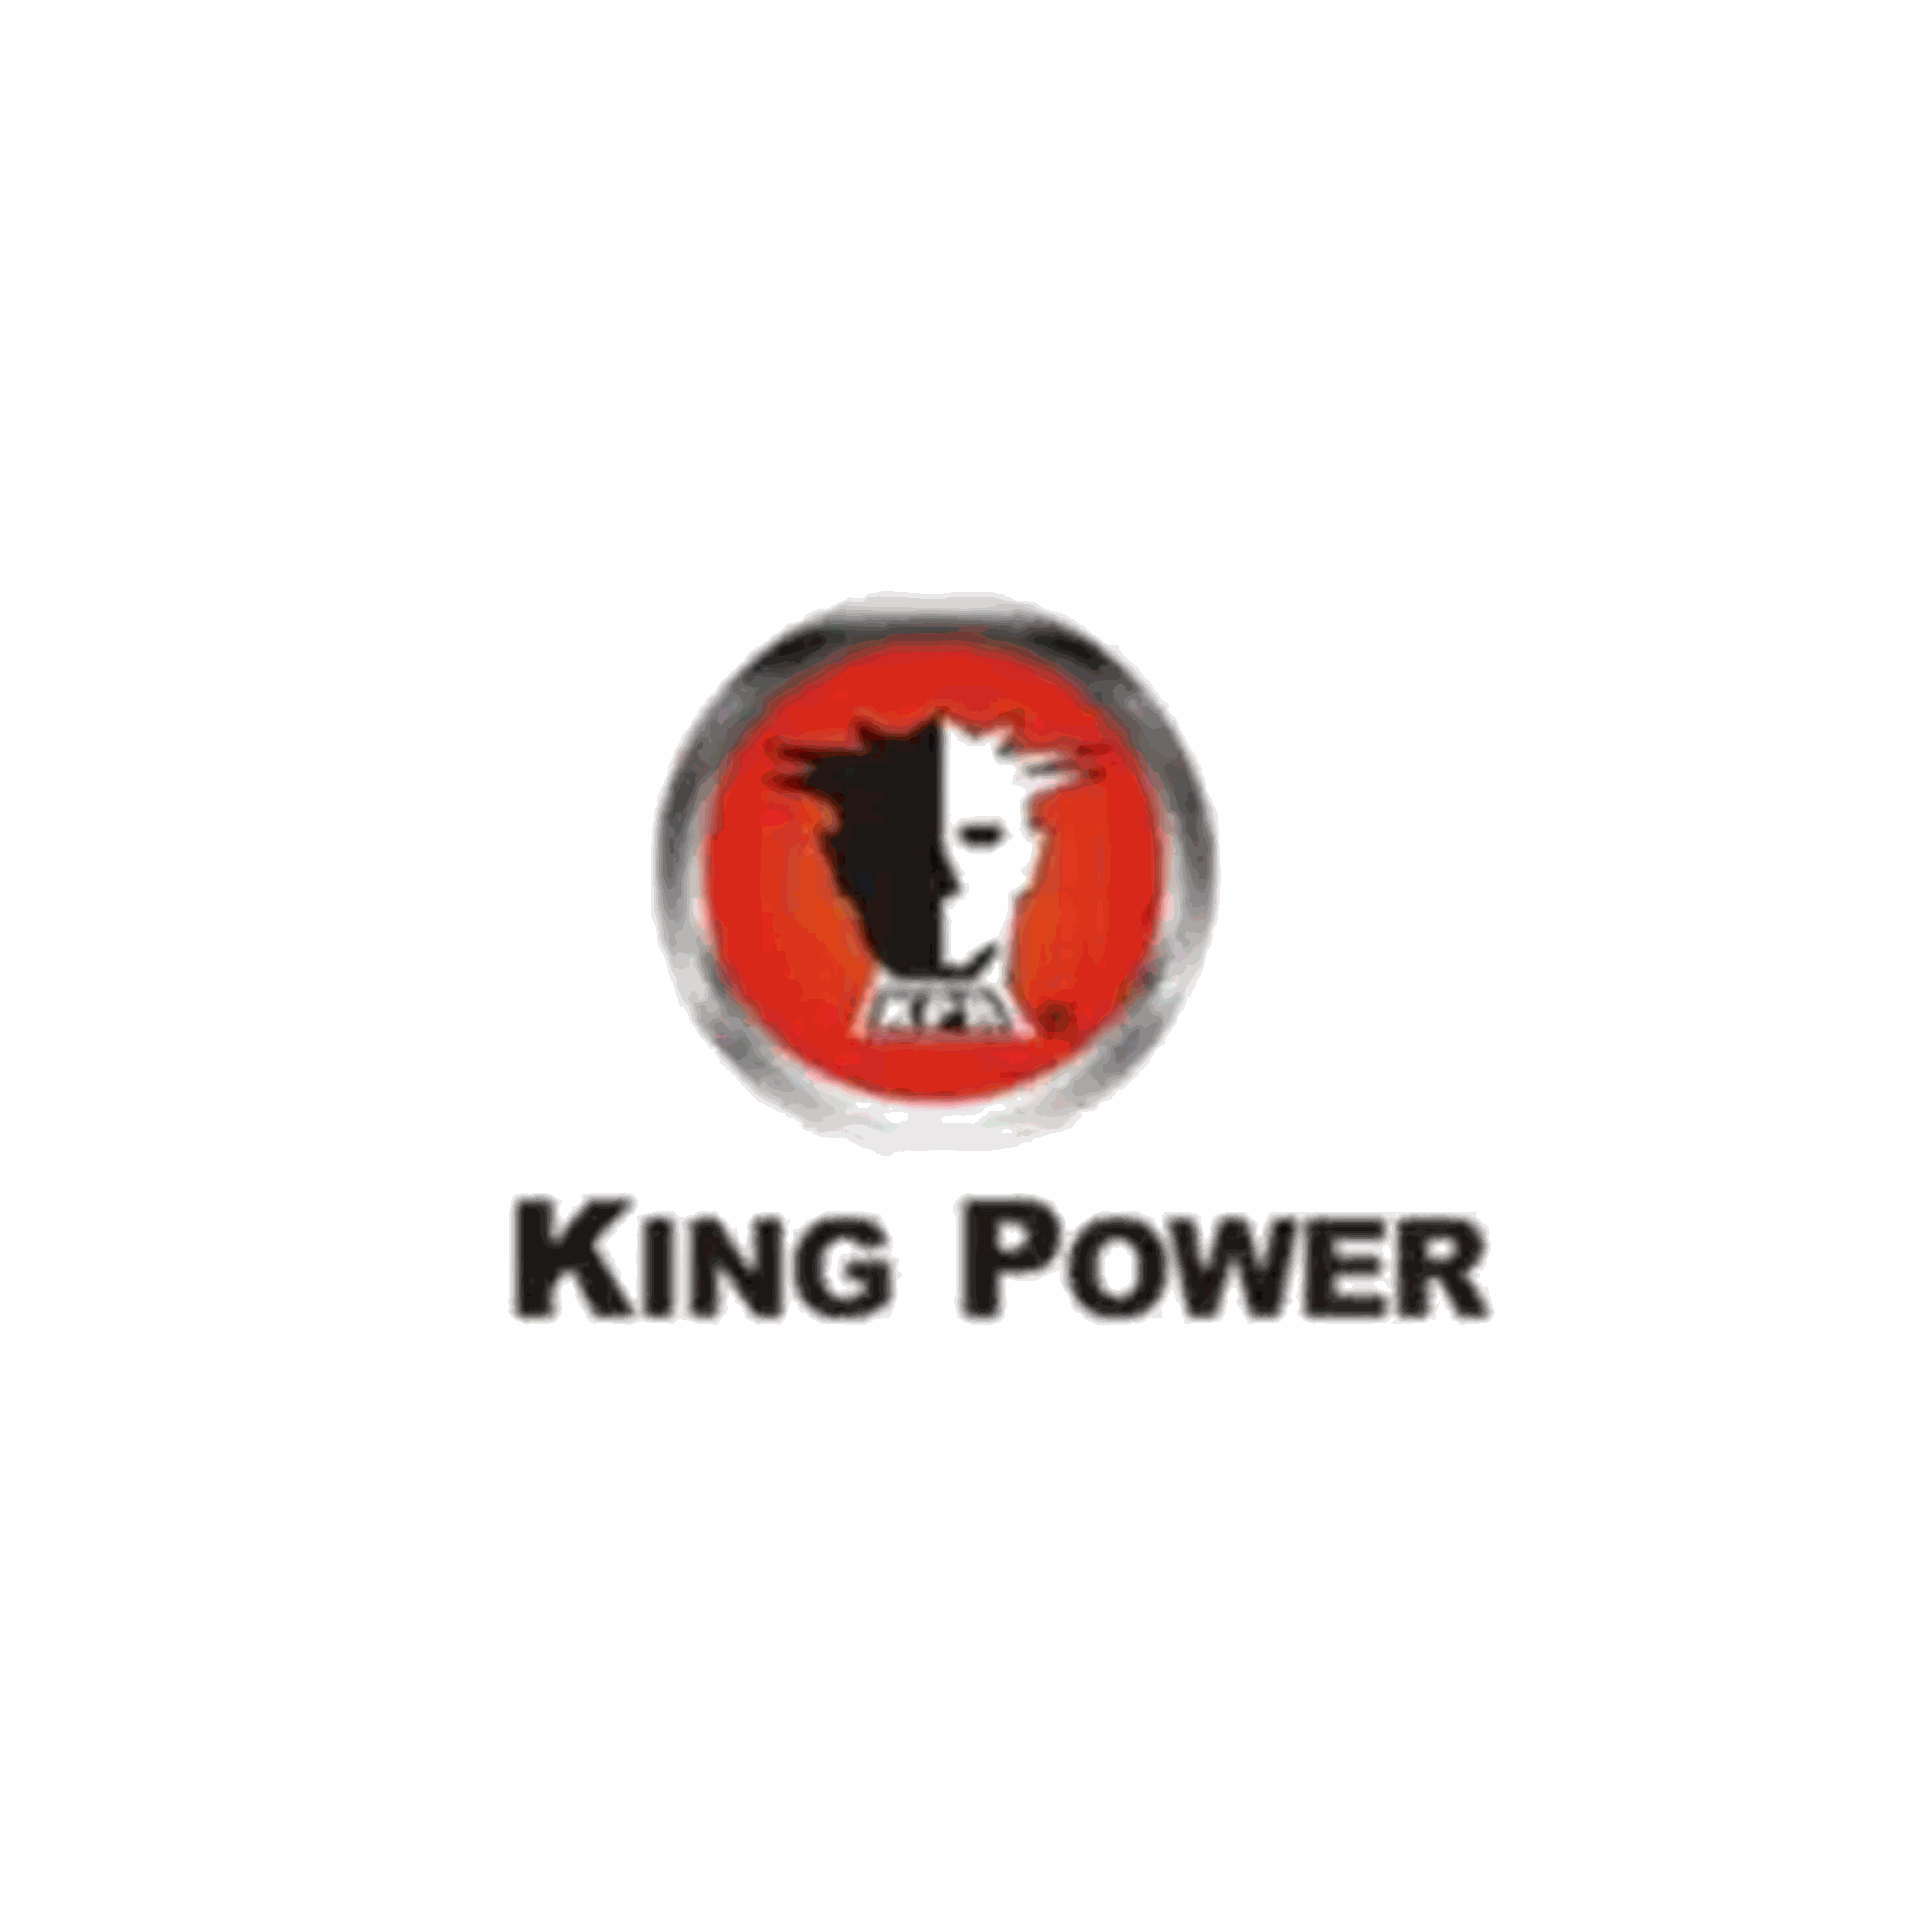 Product Brand: King Power